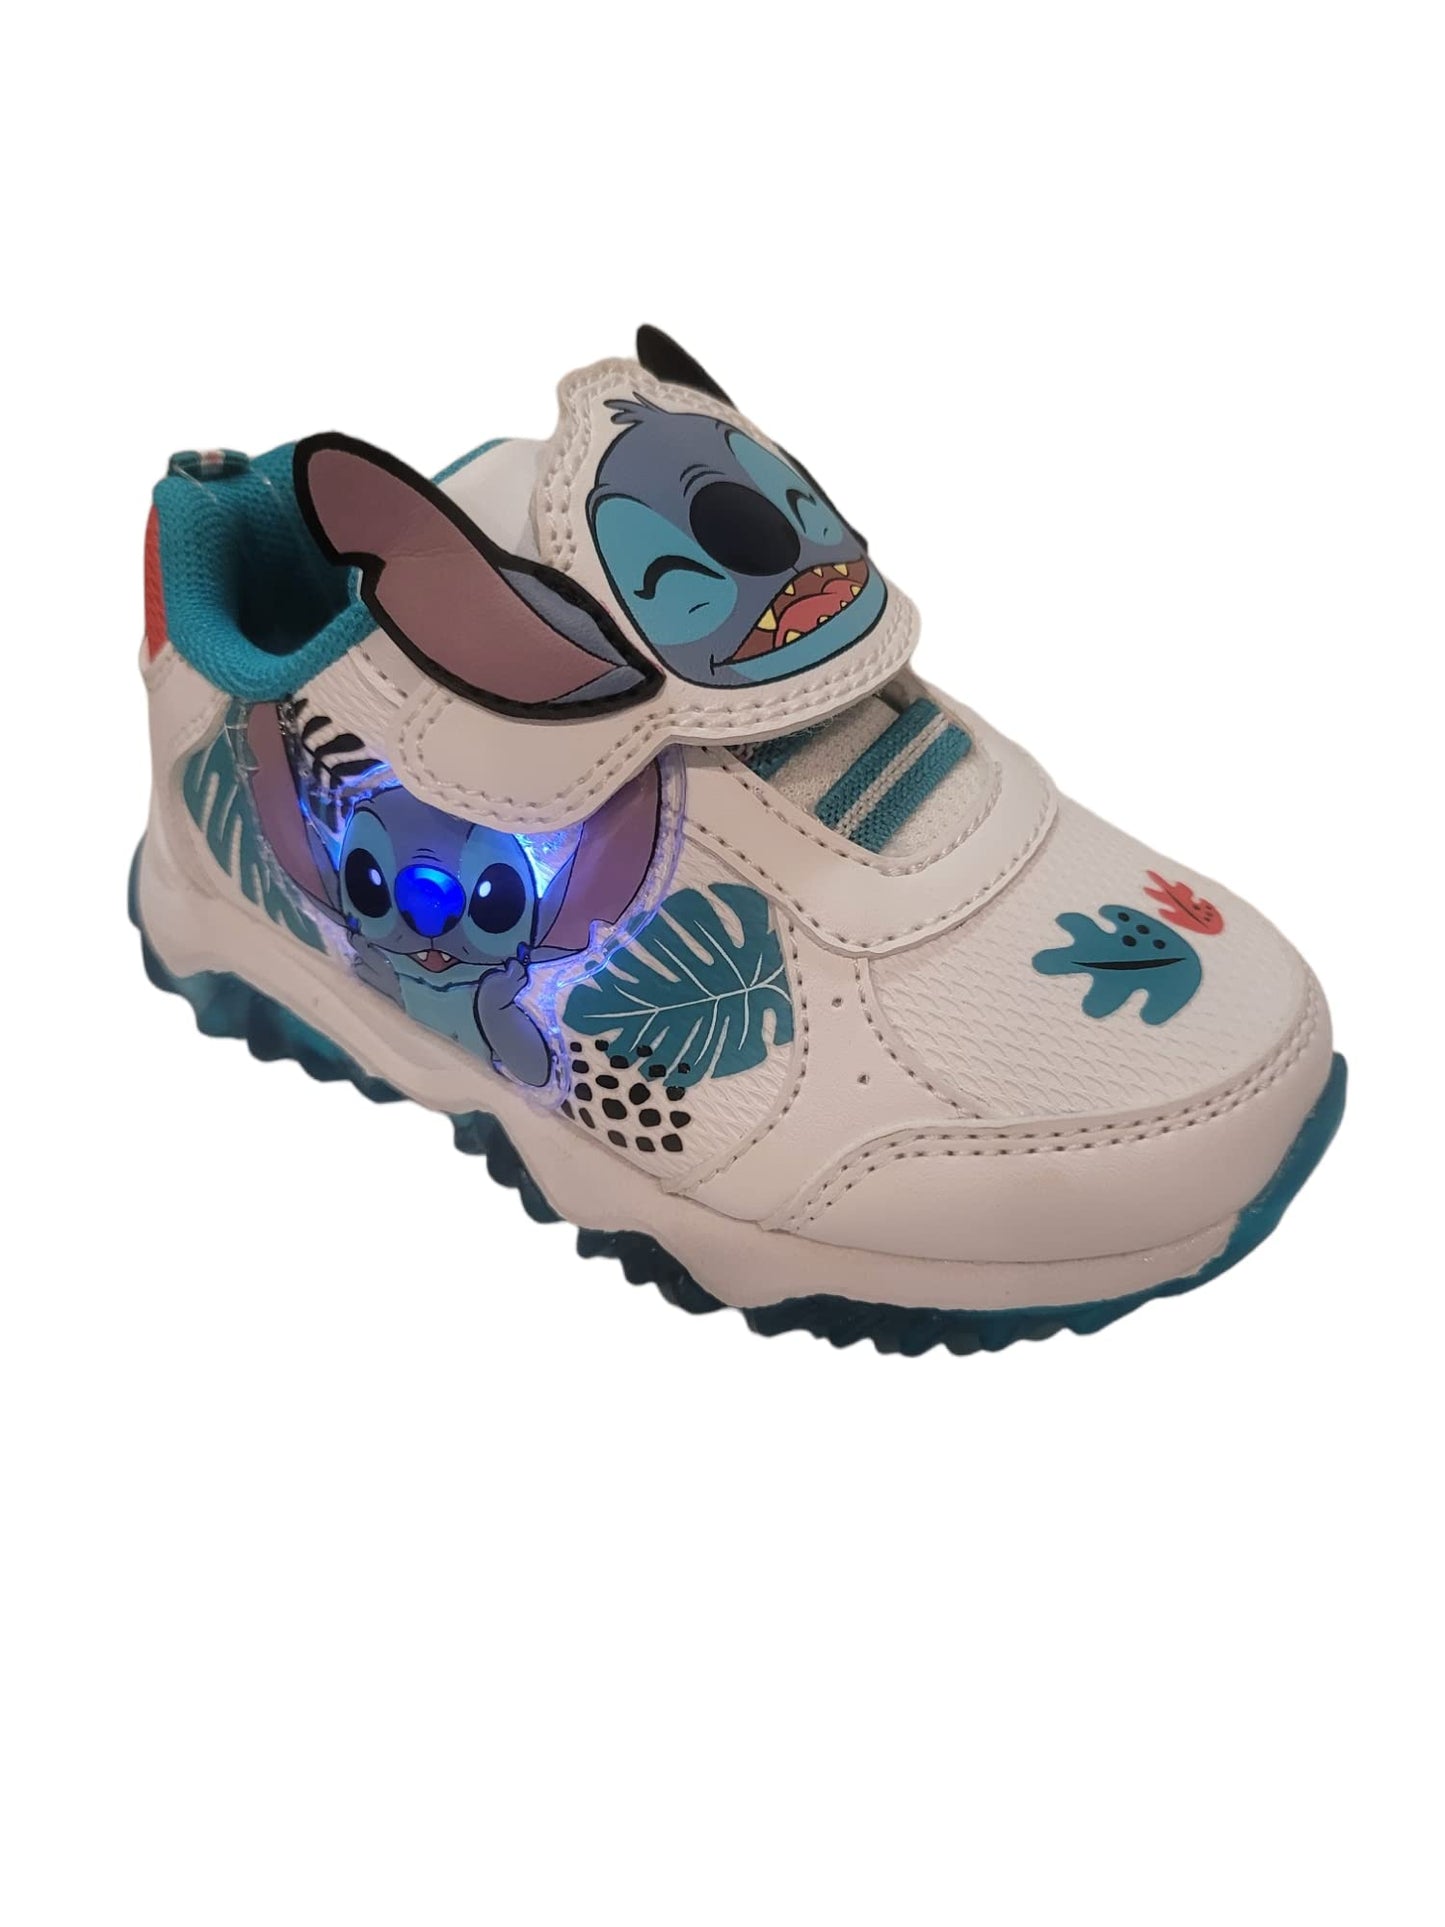 Disney Lilo and Stitch Lighted Athletic Sneaker (Toddler/Little Kid)